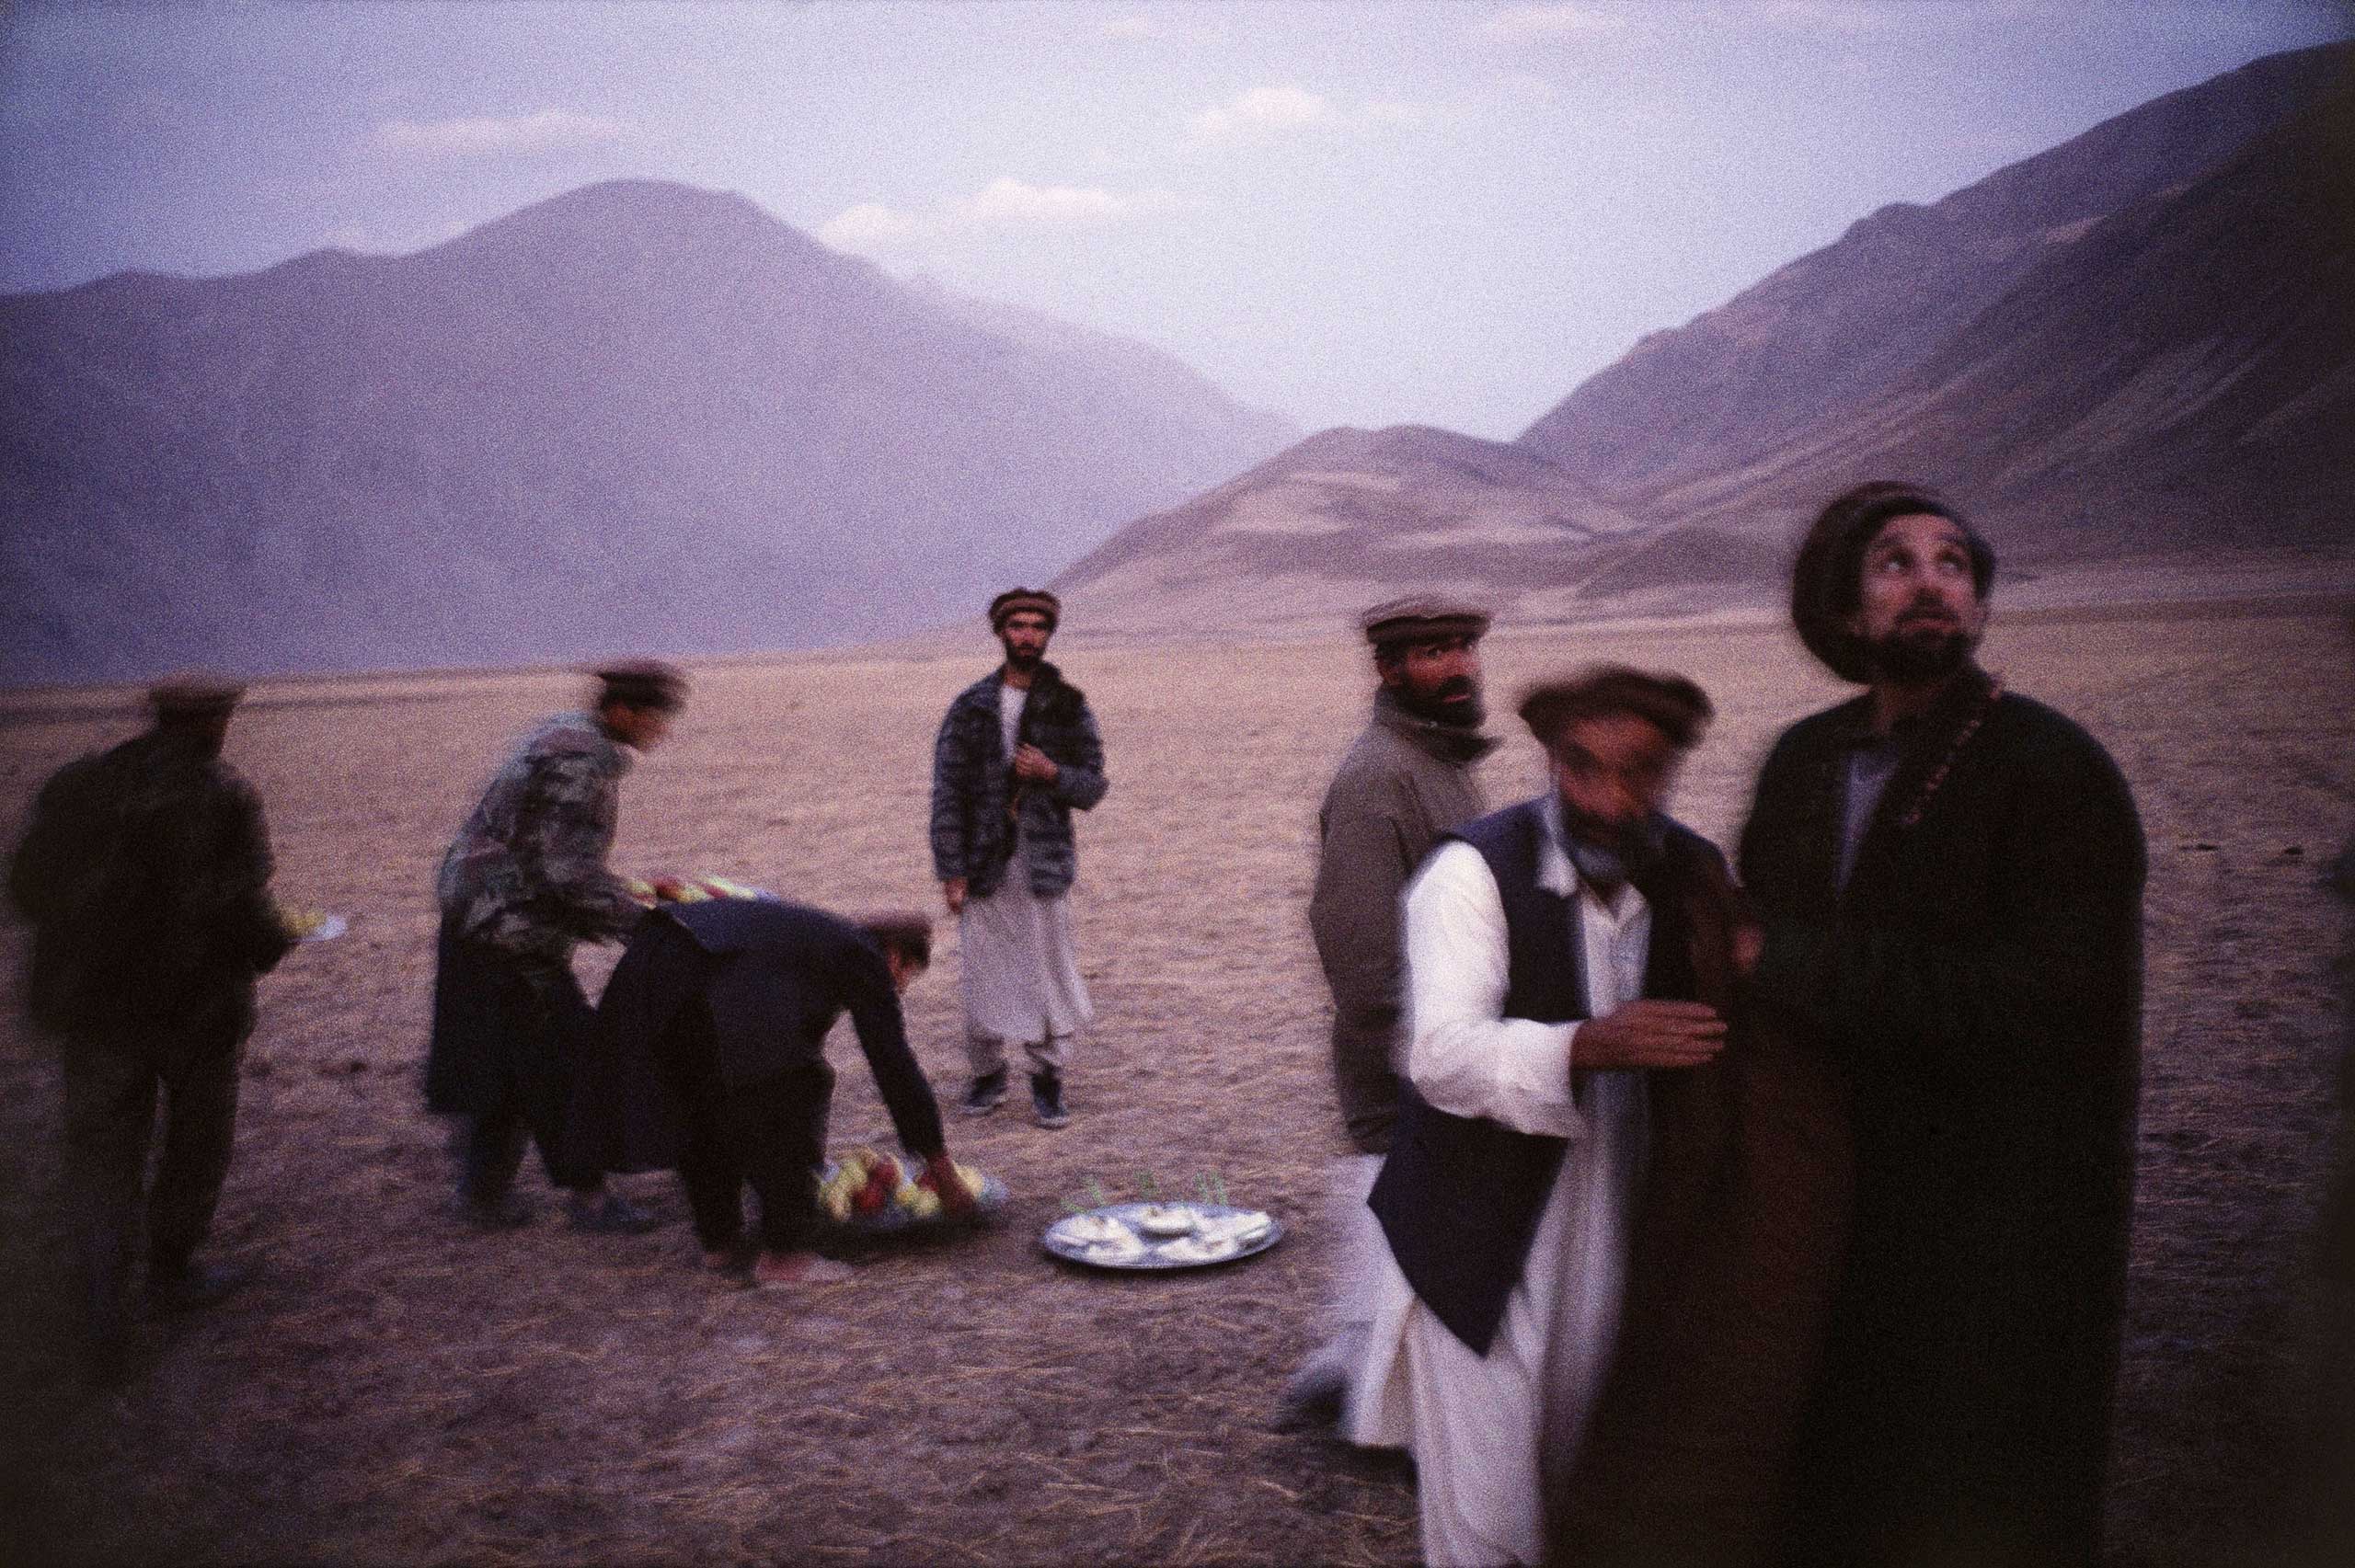 Northern Alliance leader Ahmed Shah Massoud with close friends after an early evening prayer service, Feyzabad, Afghanistan, 1998.